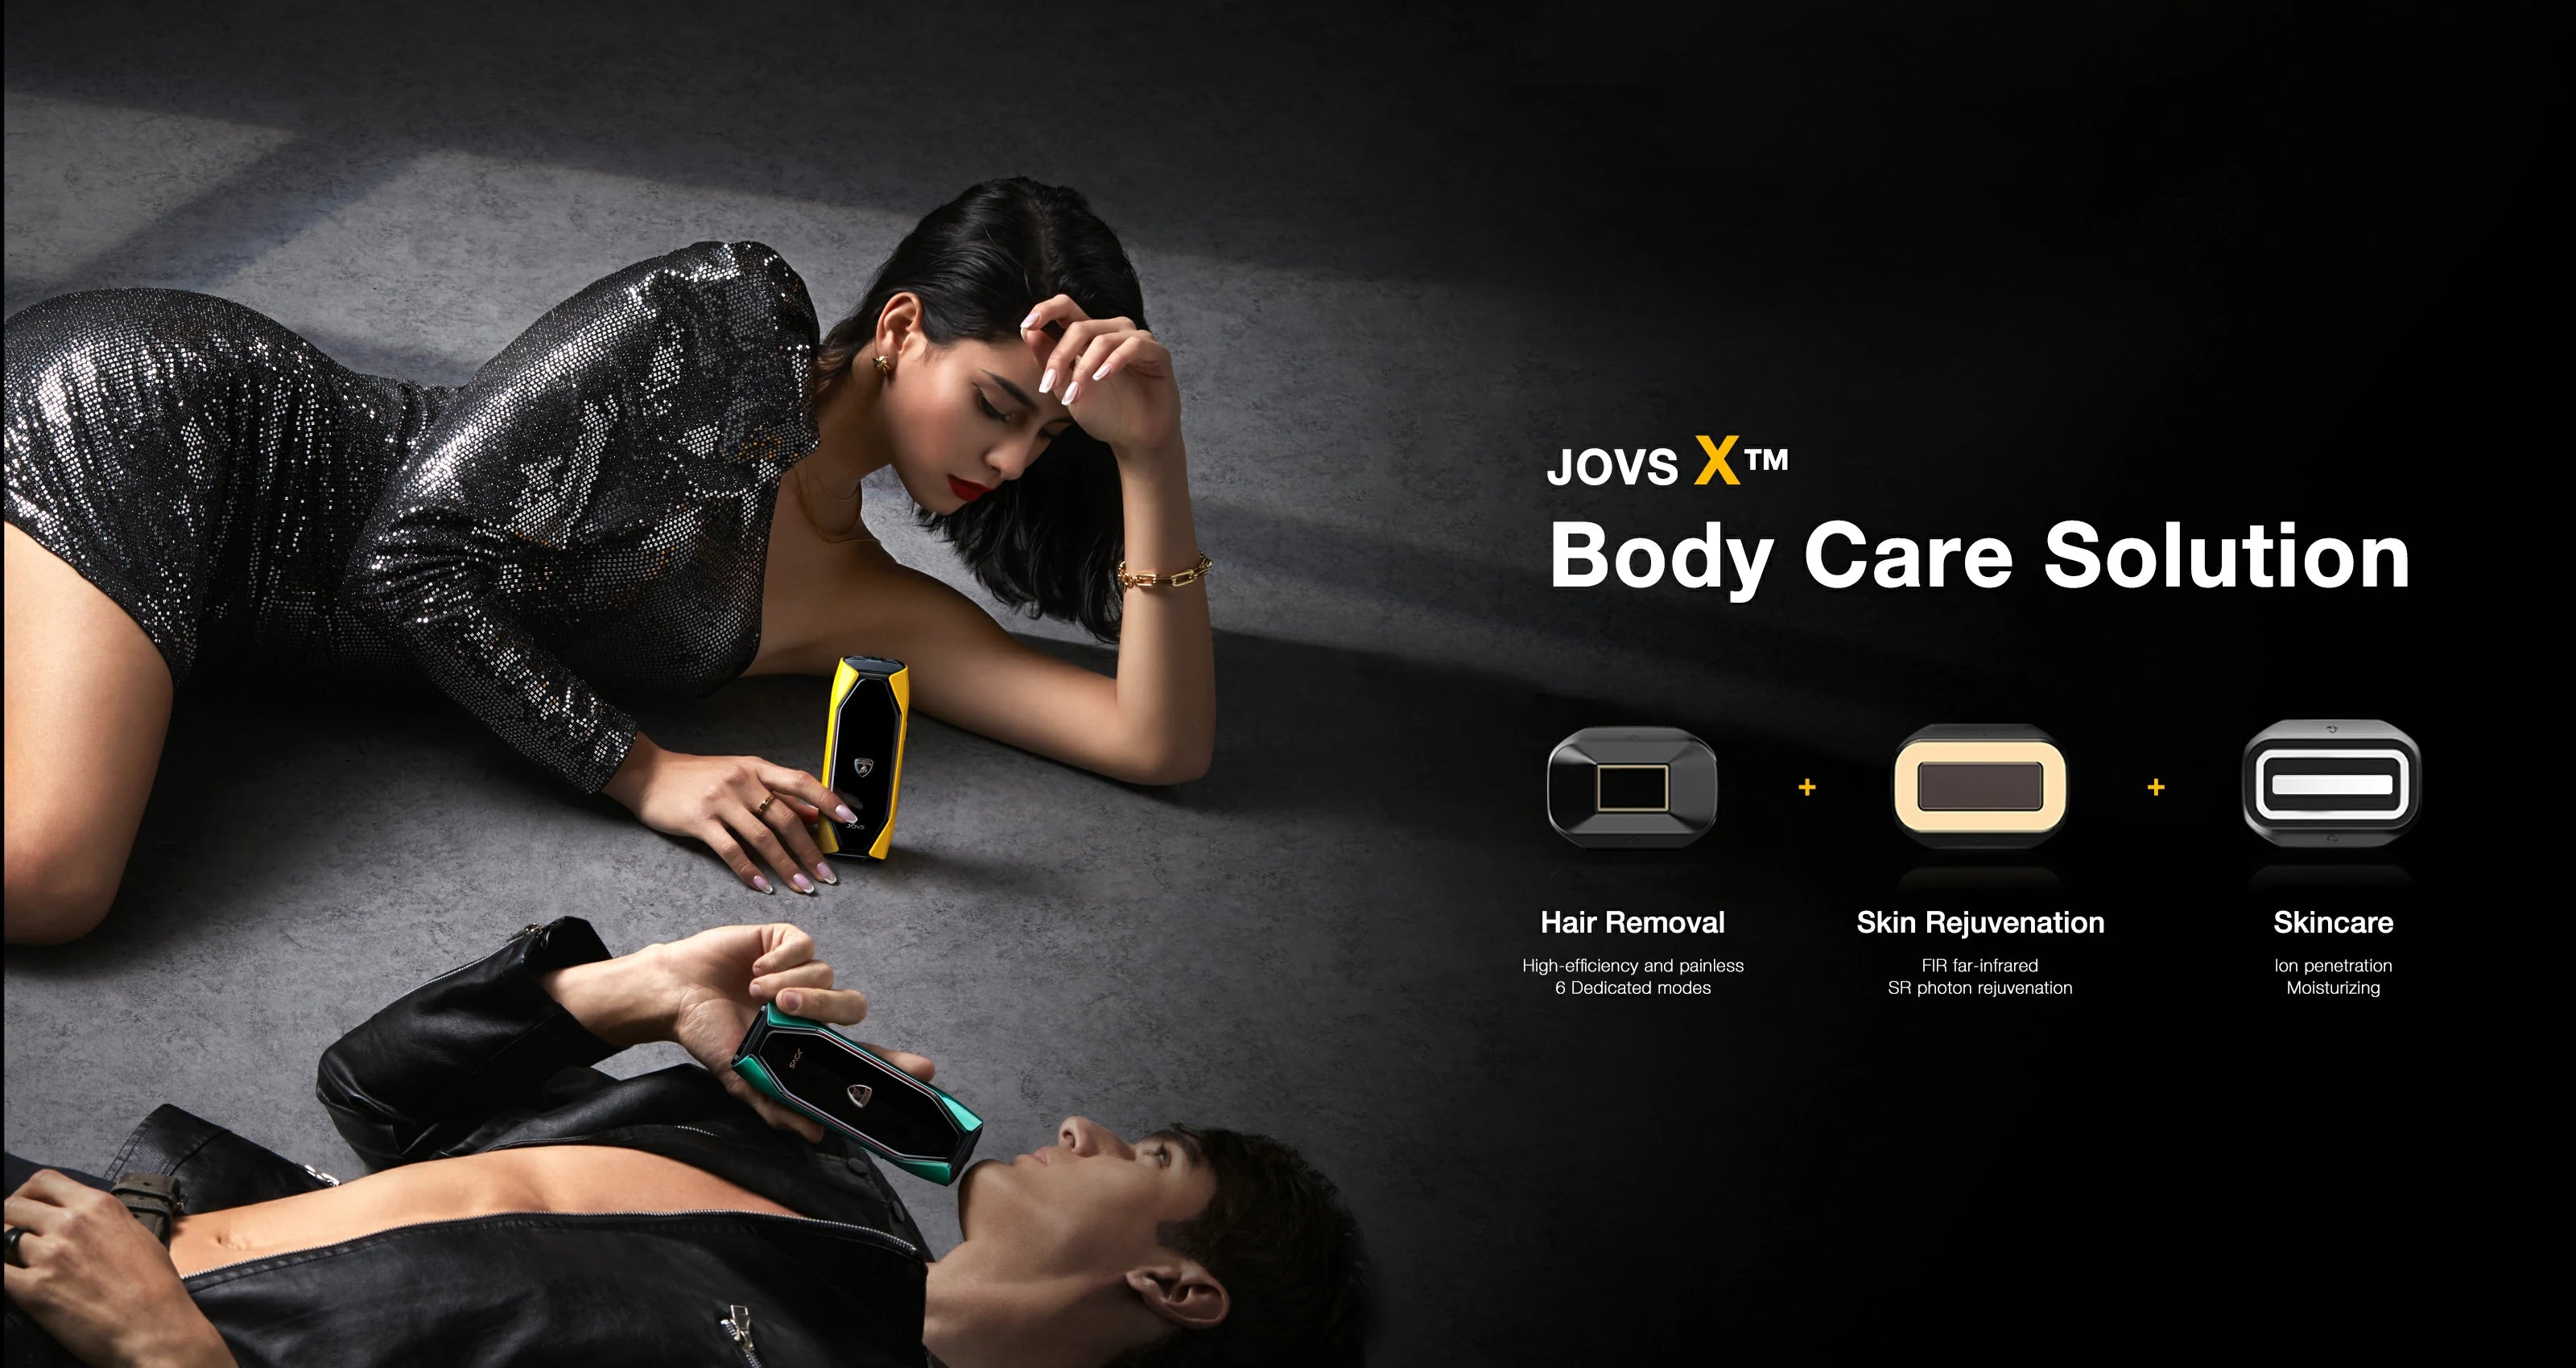 Elegant woman lying down showcasing JOVS X™ Hair Removal Device, with male model demonstrating device use, spotlighting hair removal, skin rejuvenation, and skincare technology.